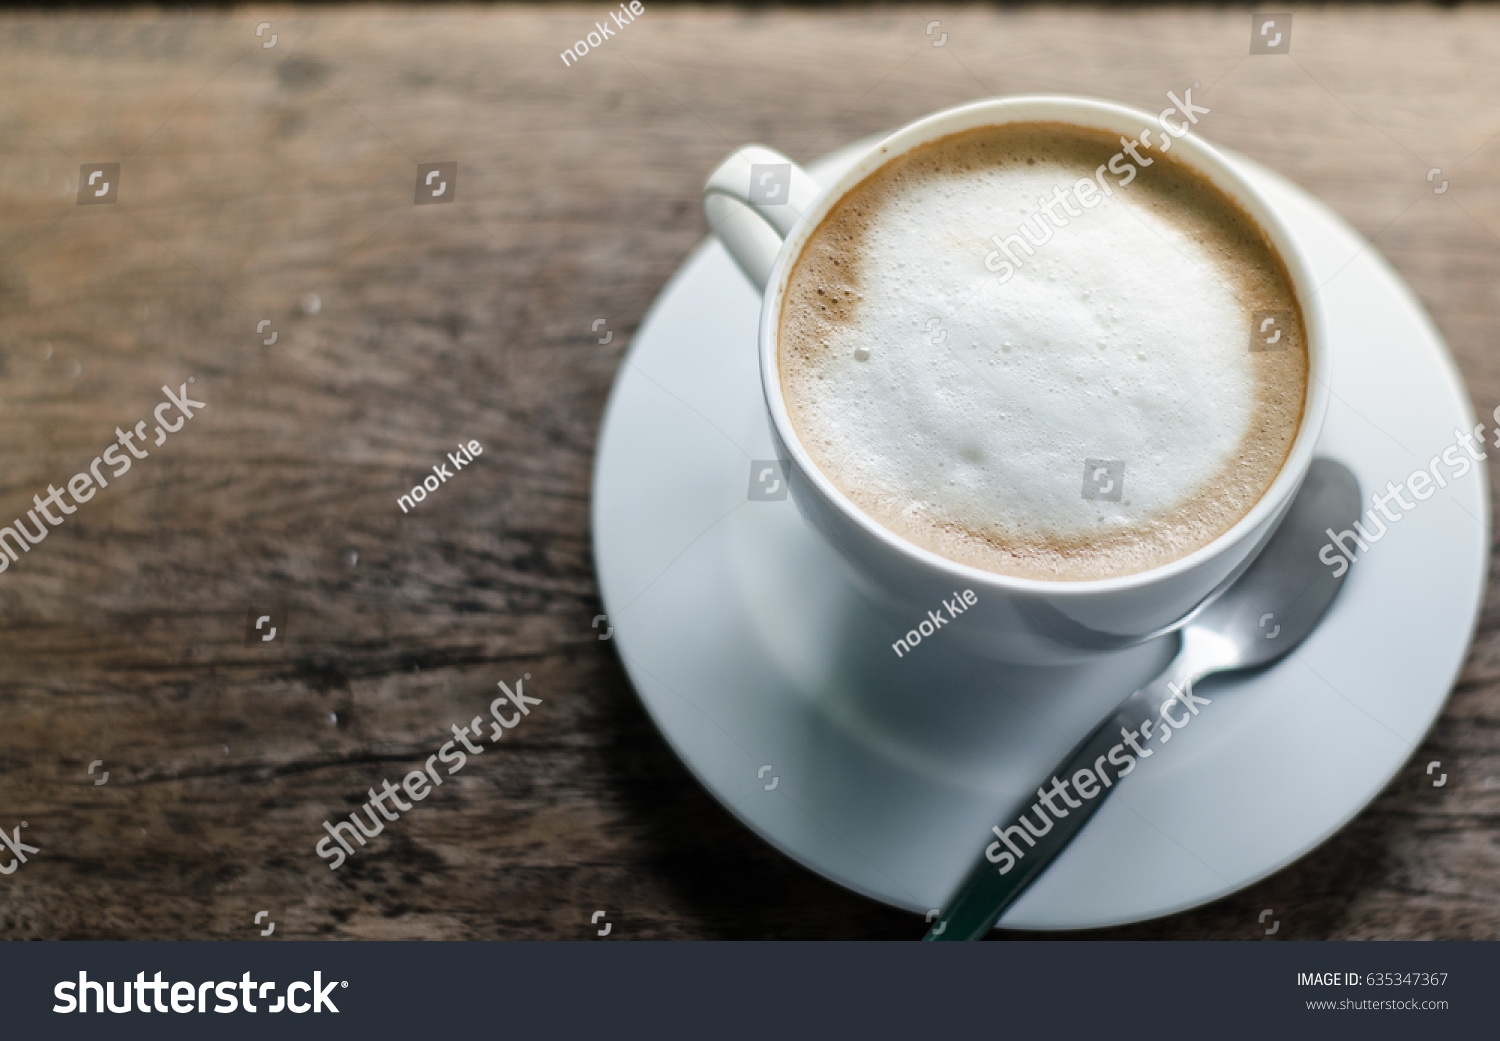 A cup of coffee in a white cup on wooden background #635347367